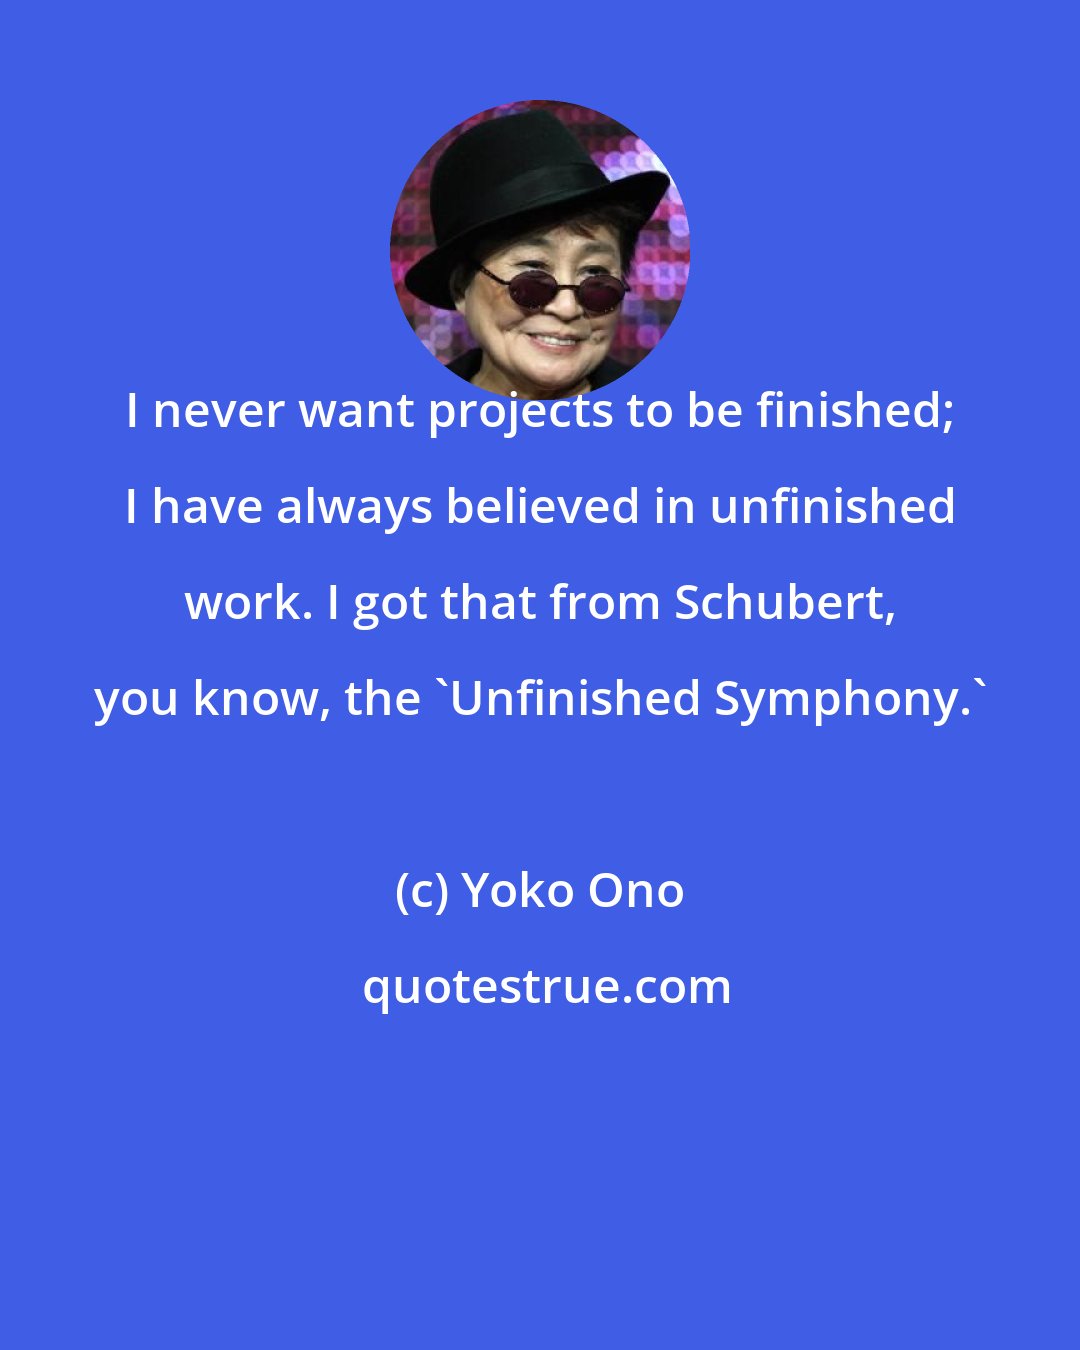 Yoko Ono: I never want projects to be finished; I have always believed in unfinished work. I got that from Schubert, you know, the 'Unfinished Symphony.'